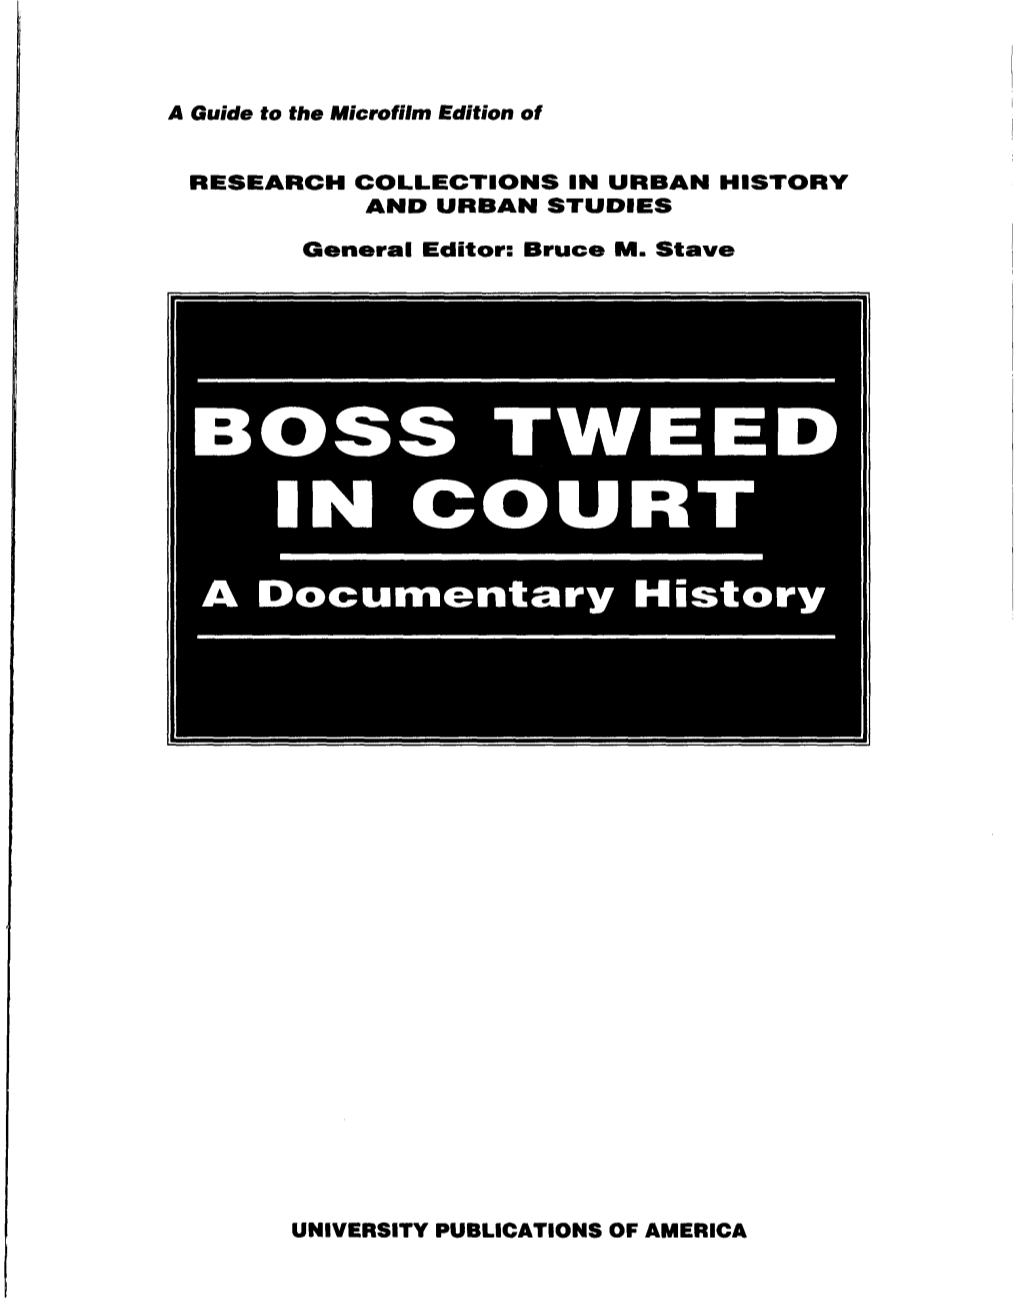 Boss Tweed in Court a Documentary History